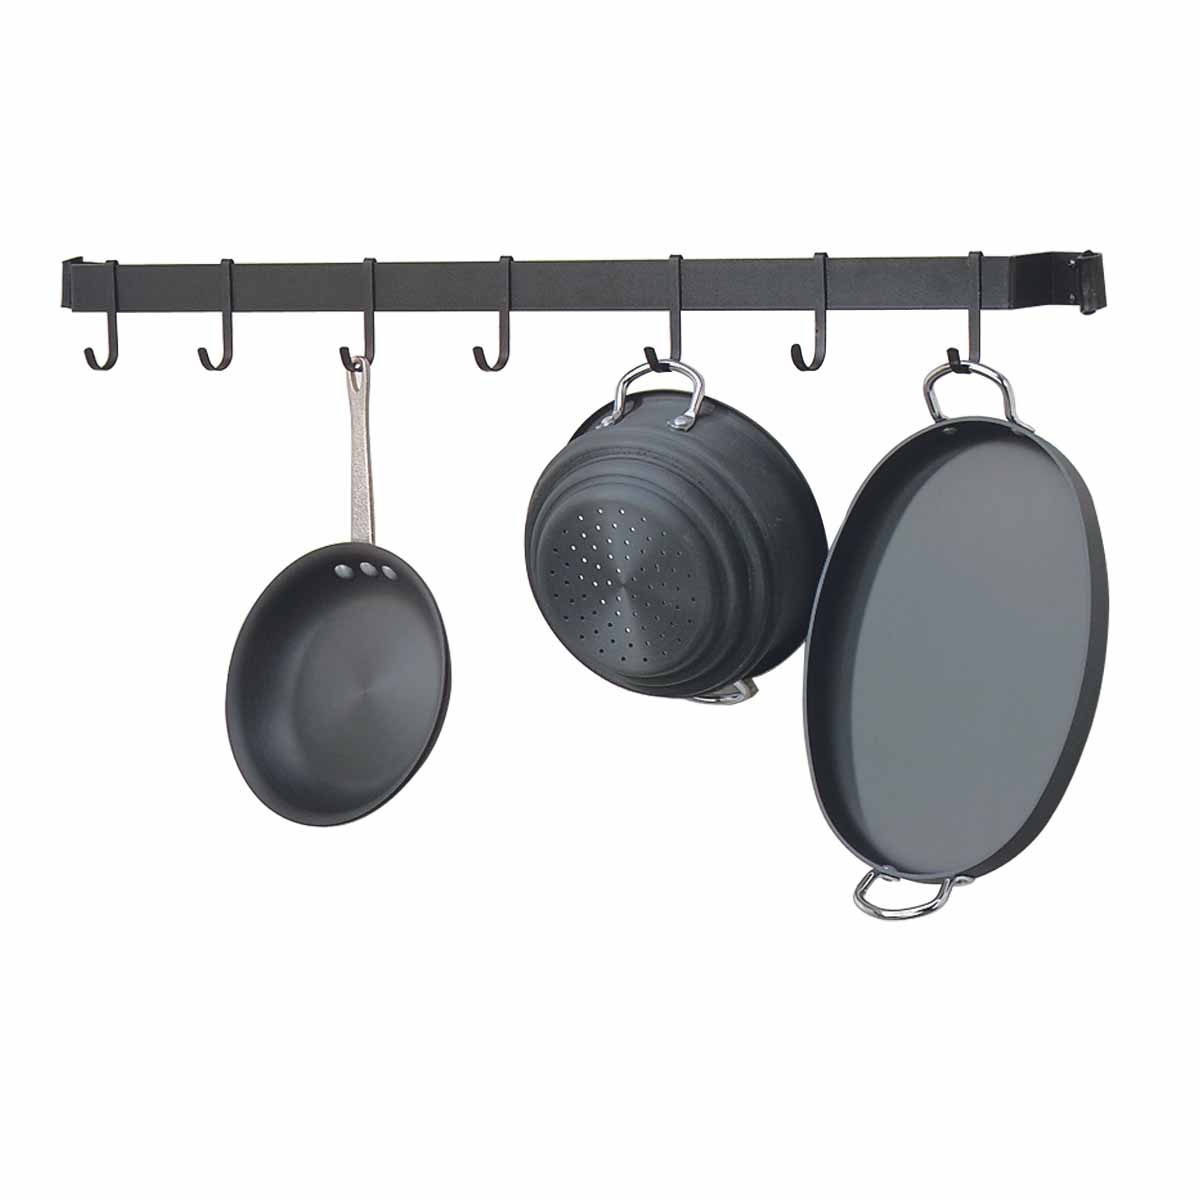 https://wroughtworks.com/images/wrought-iron/wrought-iron-pot-rack-shaker-40-inch.jpg